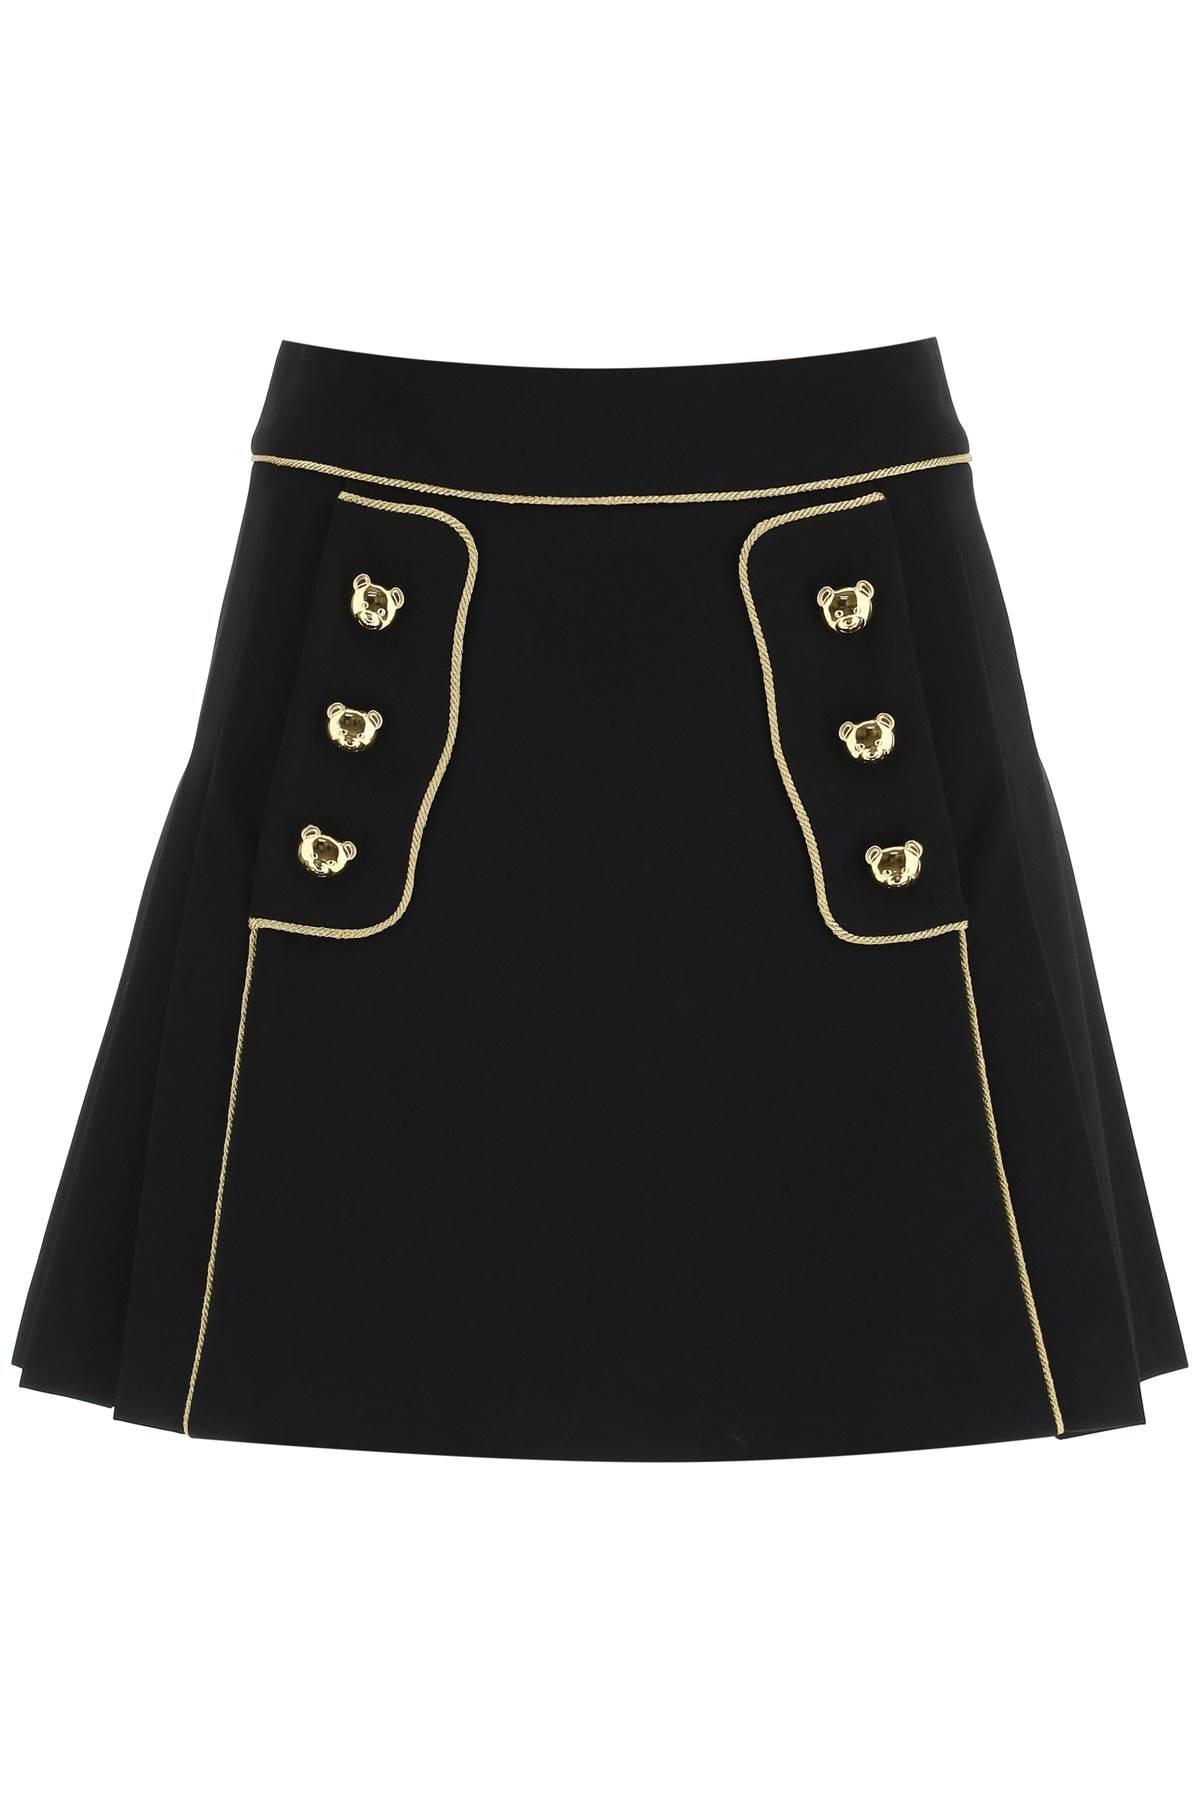 Moschino Mini Skirt With Teddy Bear Buttons in Black | Lyst